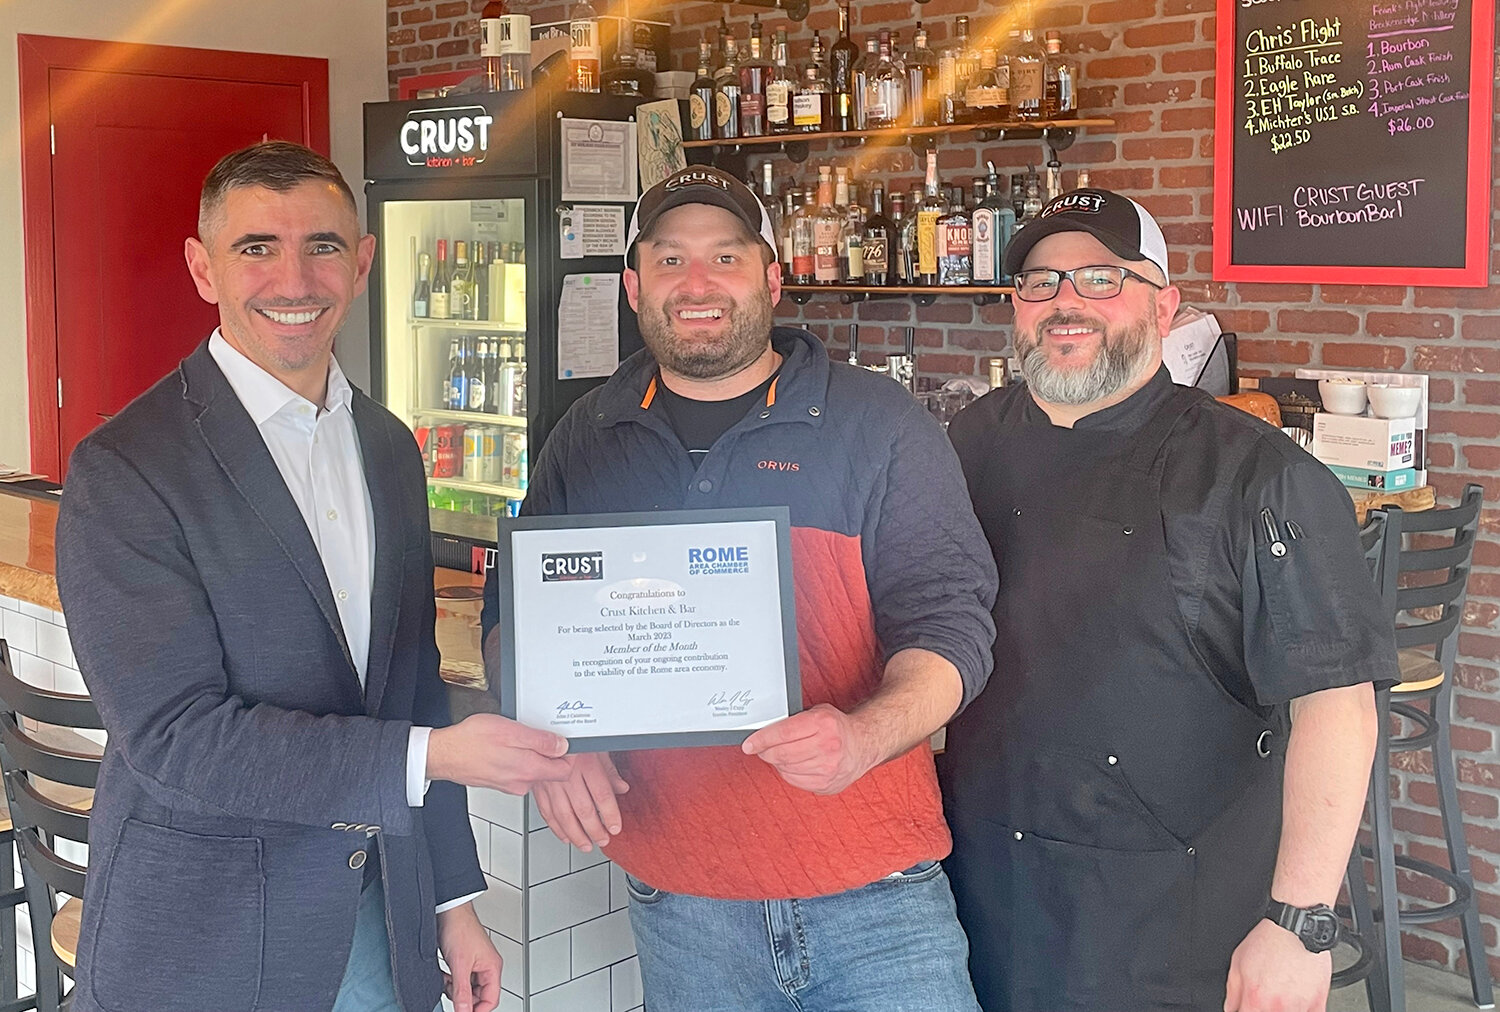 Rome Area Chamber of Commerce First Vice Chairman Greg Mattacola, left, of Strategic Financial Services, presents Crust Kitchen & Bar an award as the chamber’s March Member of the Month. Crust, 86 Hangar Road West, Suite 101 in Air City Lofts on the Griffiss Business and Technology Park at 86 Hangar Road West, seeks “to craft remarkable food and experiences for our remarkable patrons and community.” Receiving the award are Crust co-owners Chris Destito and Frank Belmont.